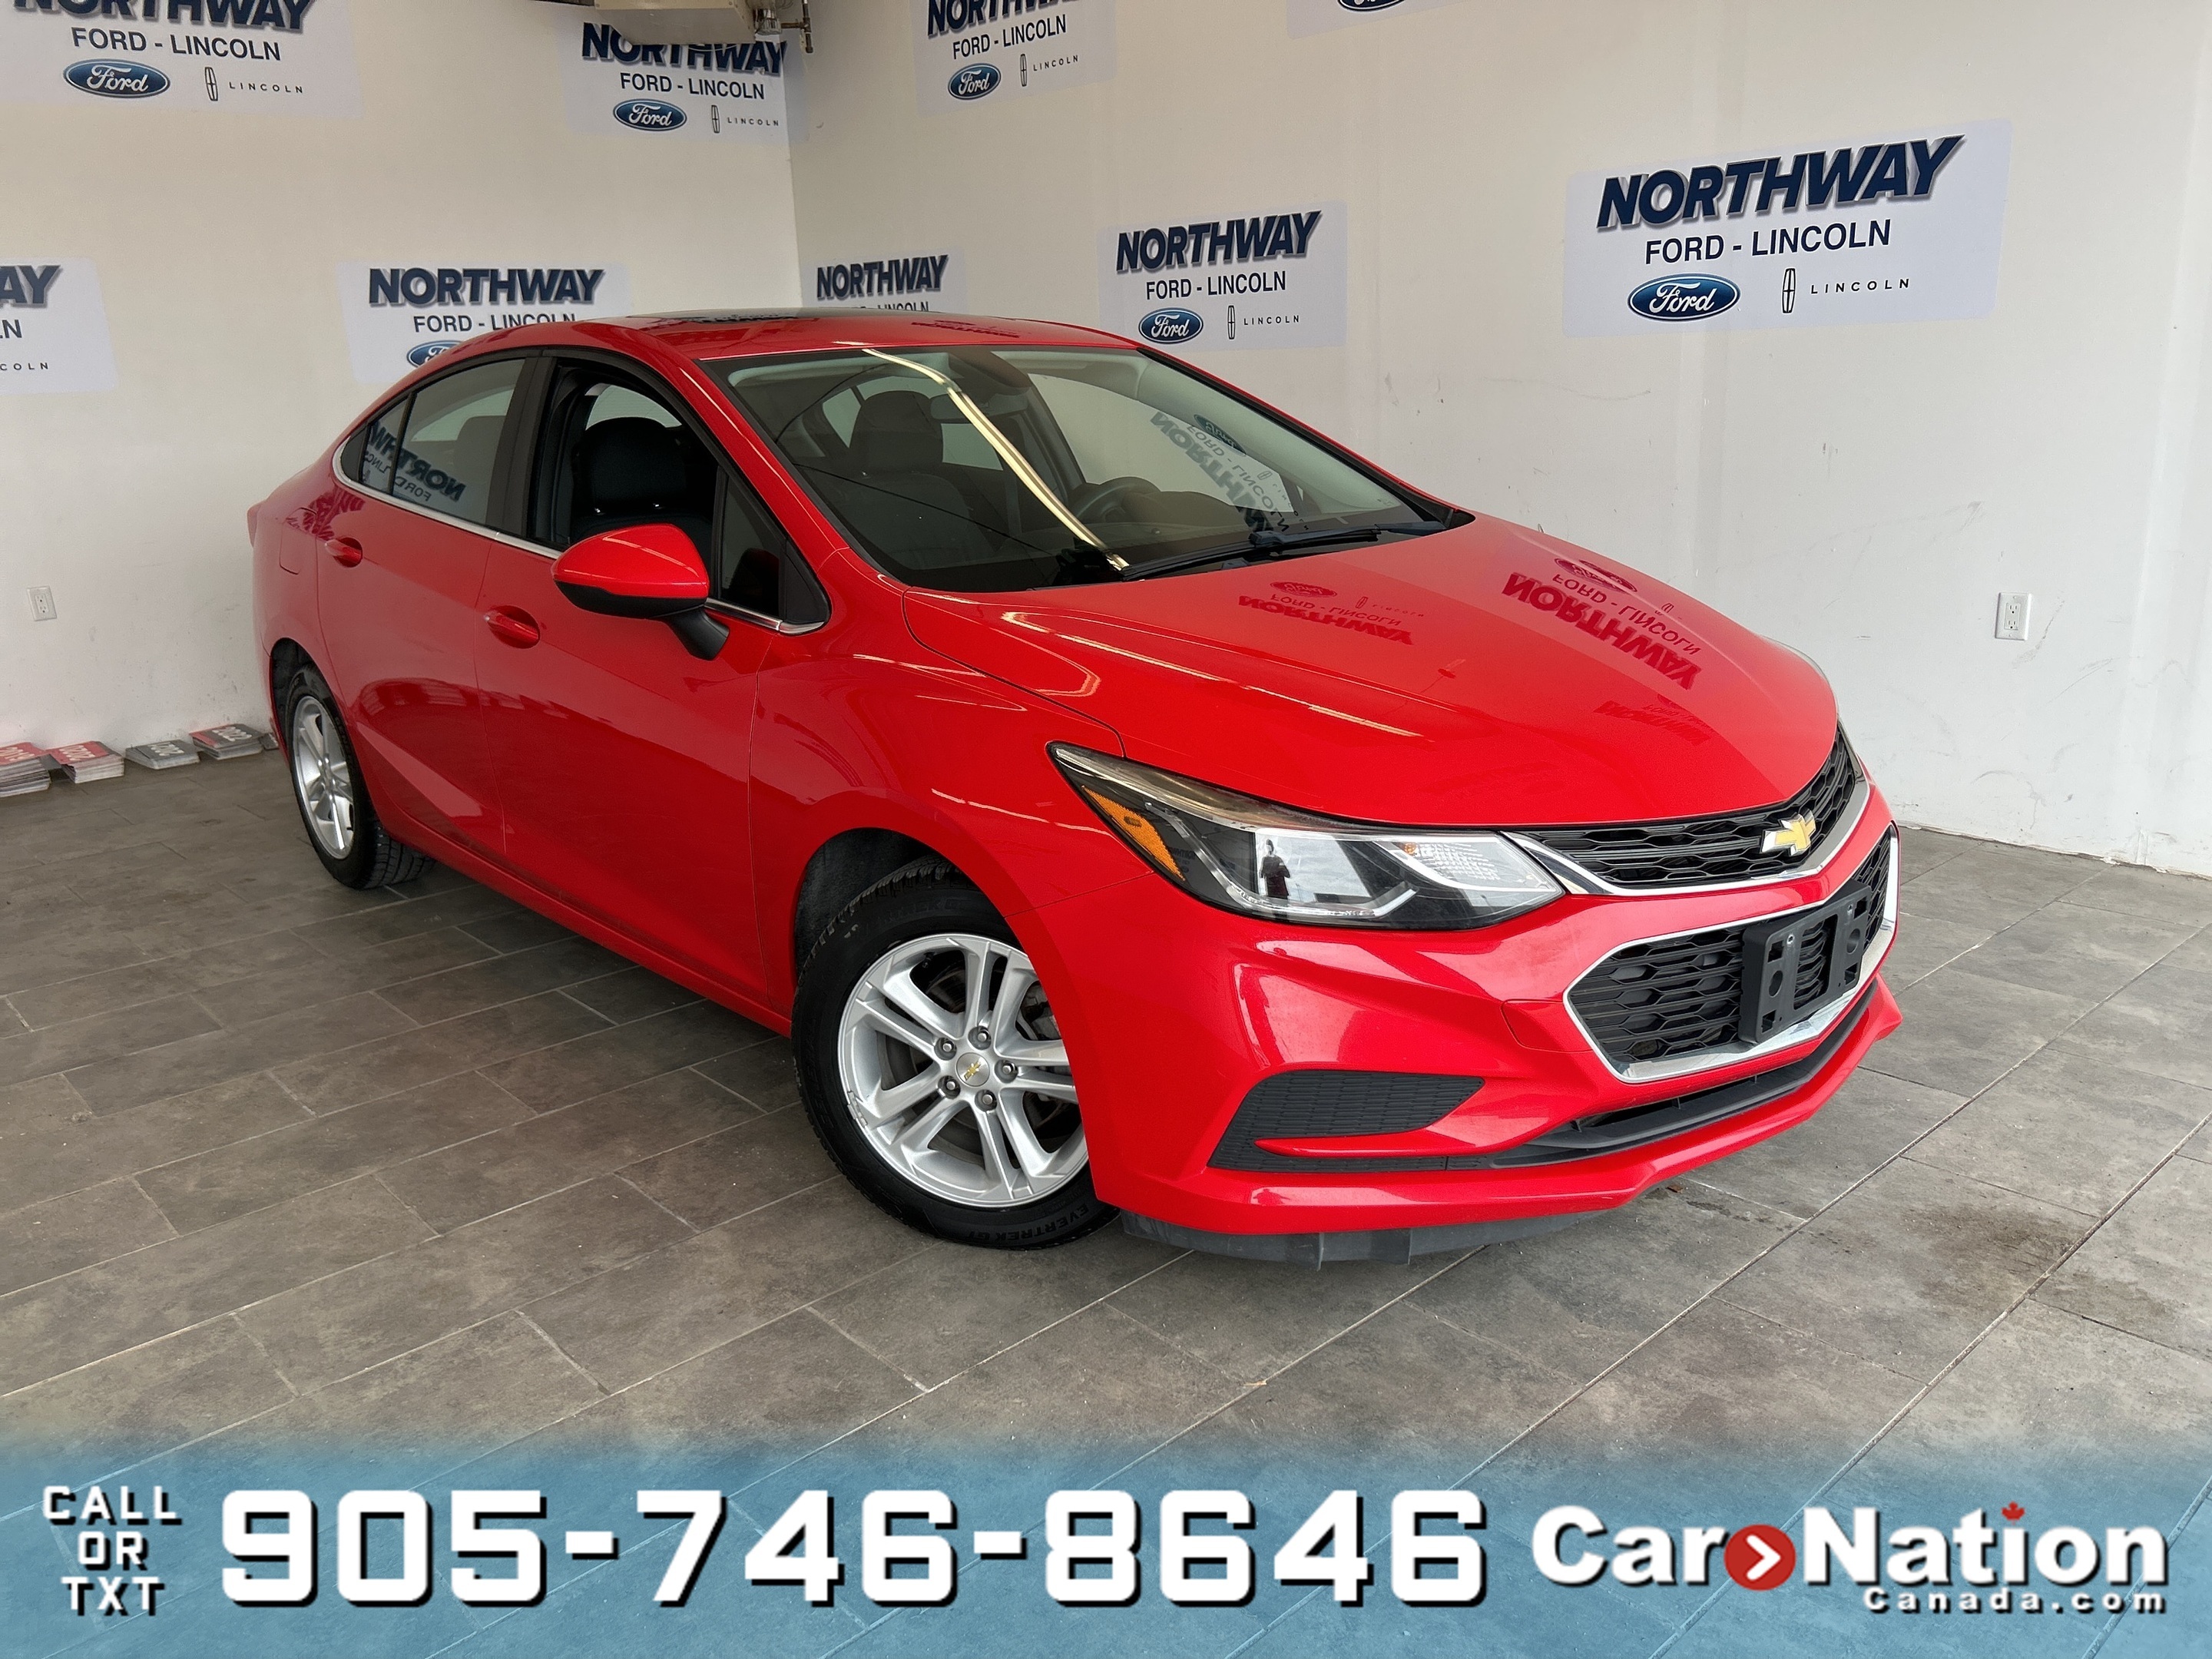 2016 Chevrolet Cruze LT | TOUCHSCREEN | SUNROOF | WE WANT YOUR TRADE!